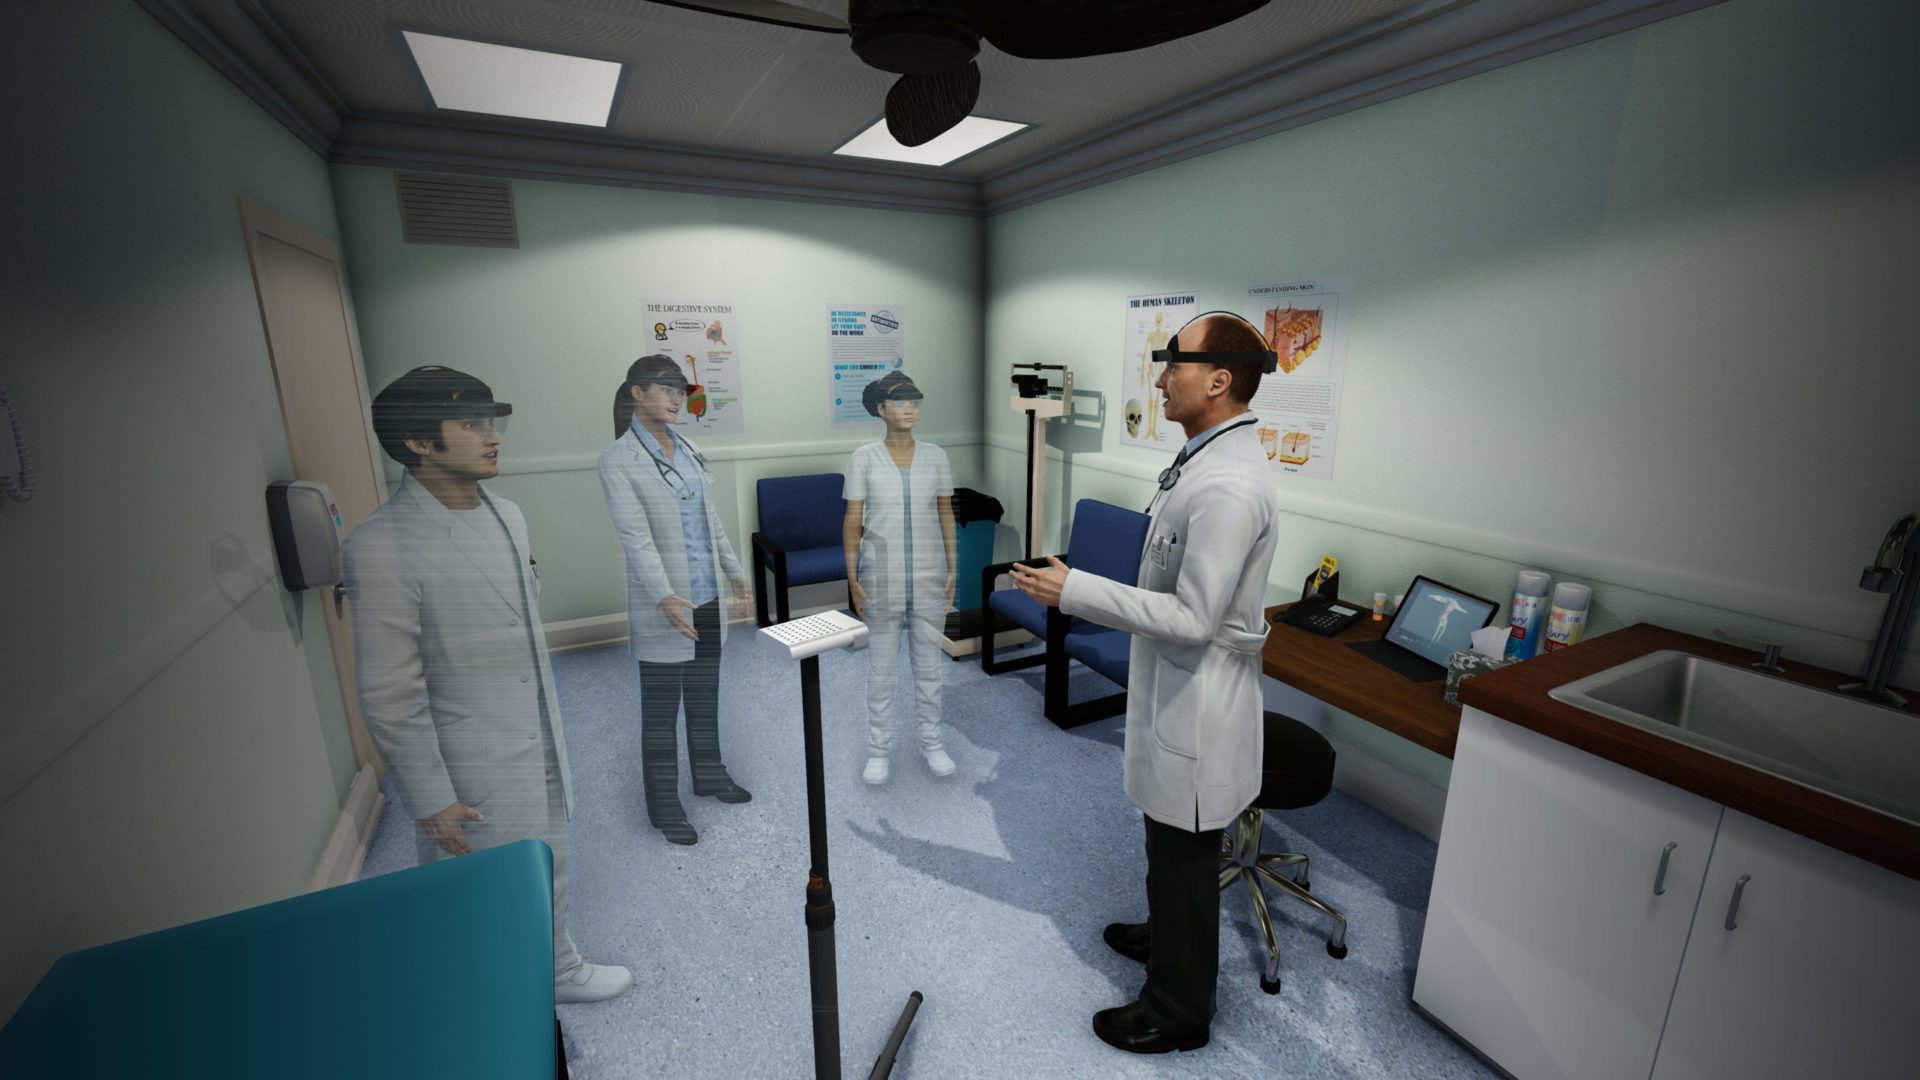 holograms of doctors